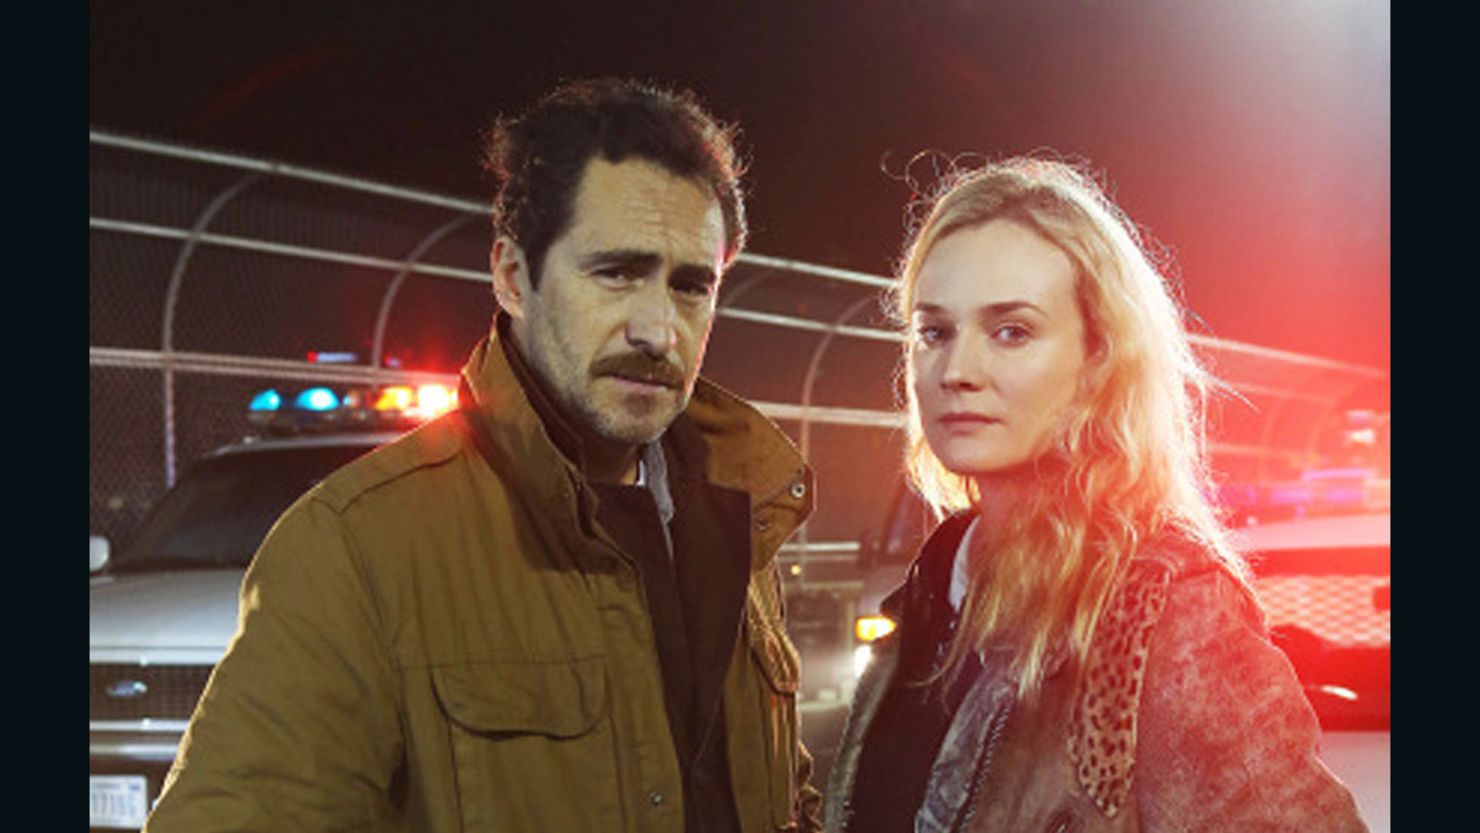 Diane Kruger and Demian Bichir will star in FX's "The Bridge."